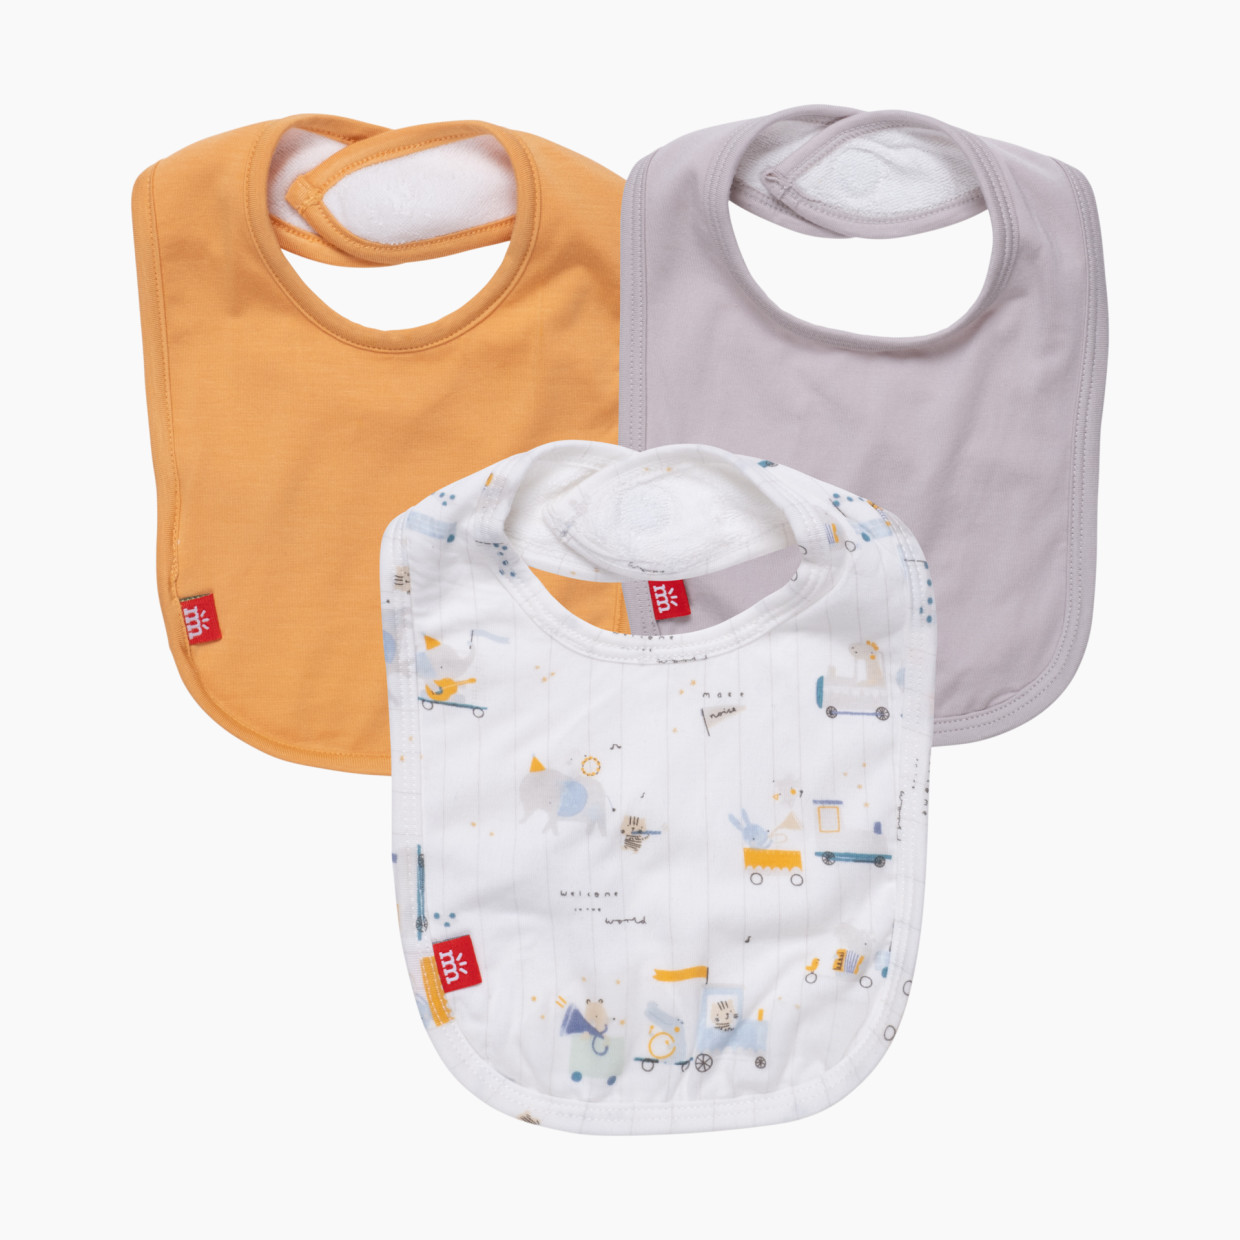 Magnetic Me Modal 3 Pack Bibs - Welcome Wagon, One Size.